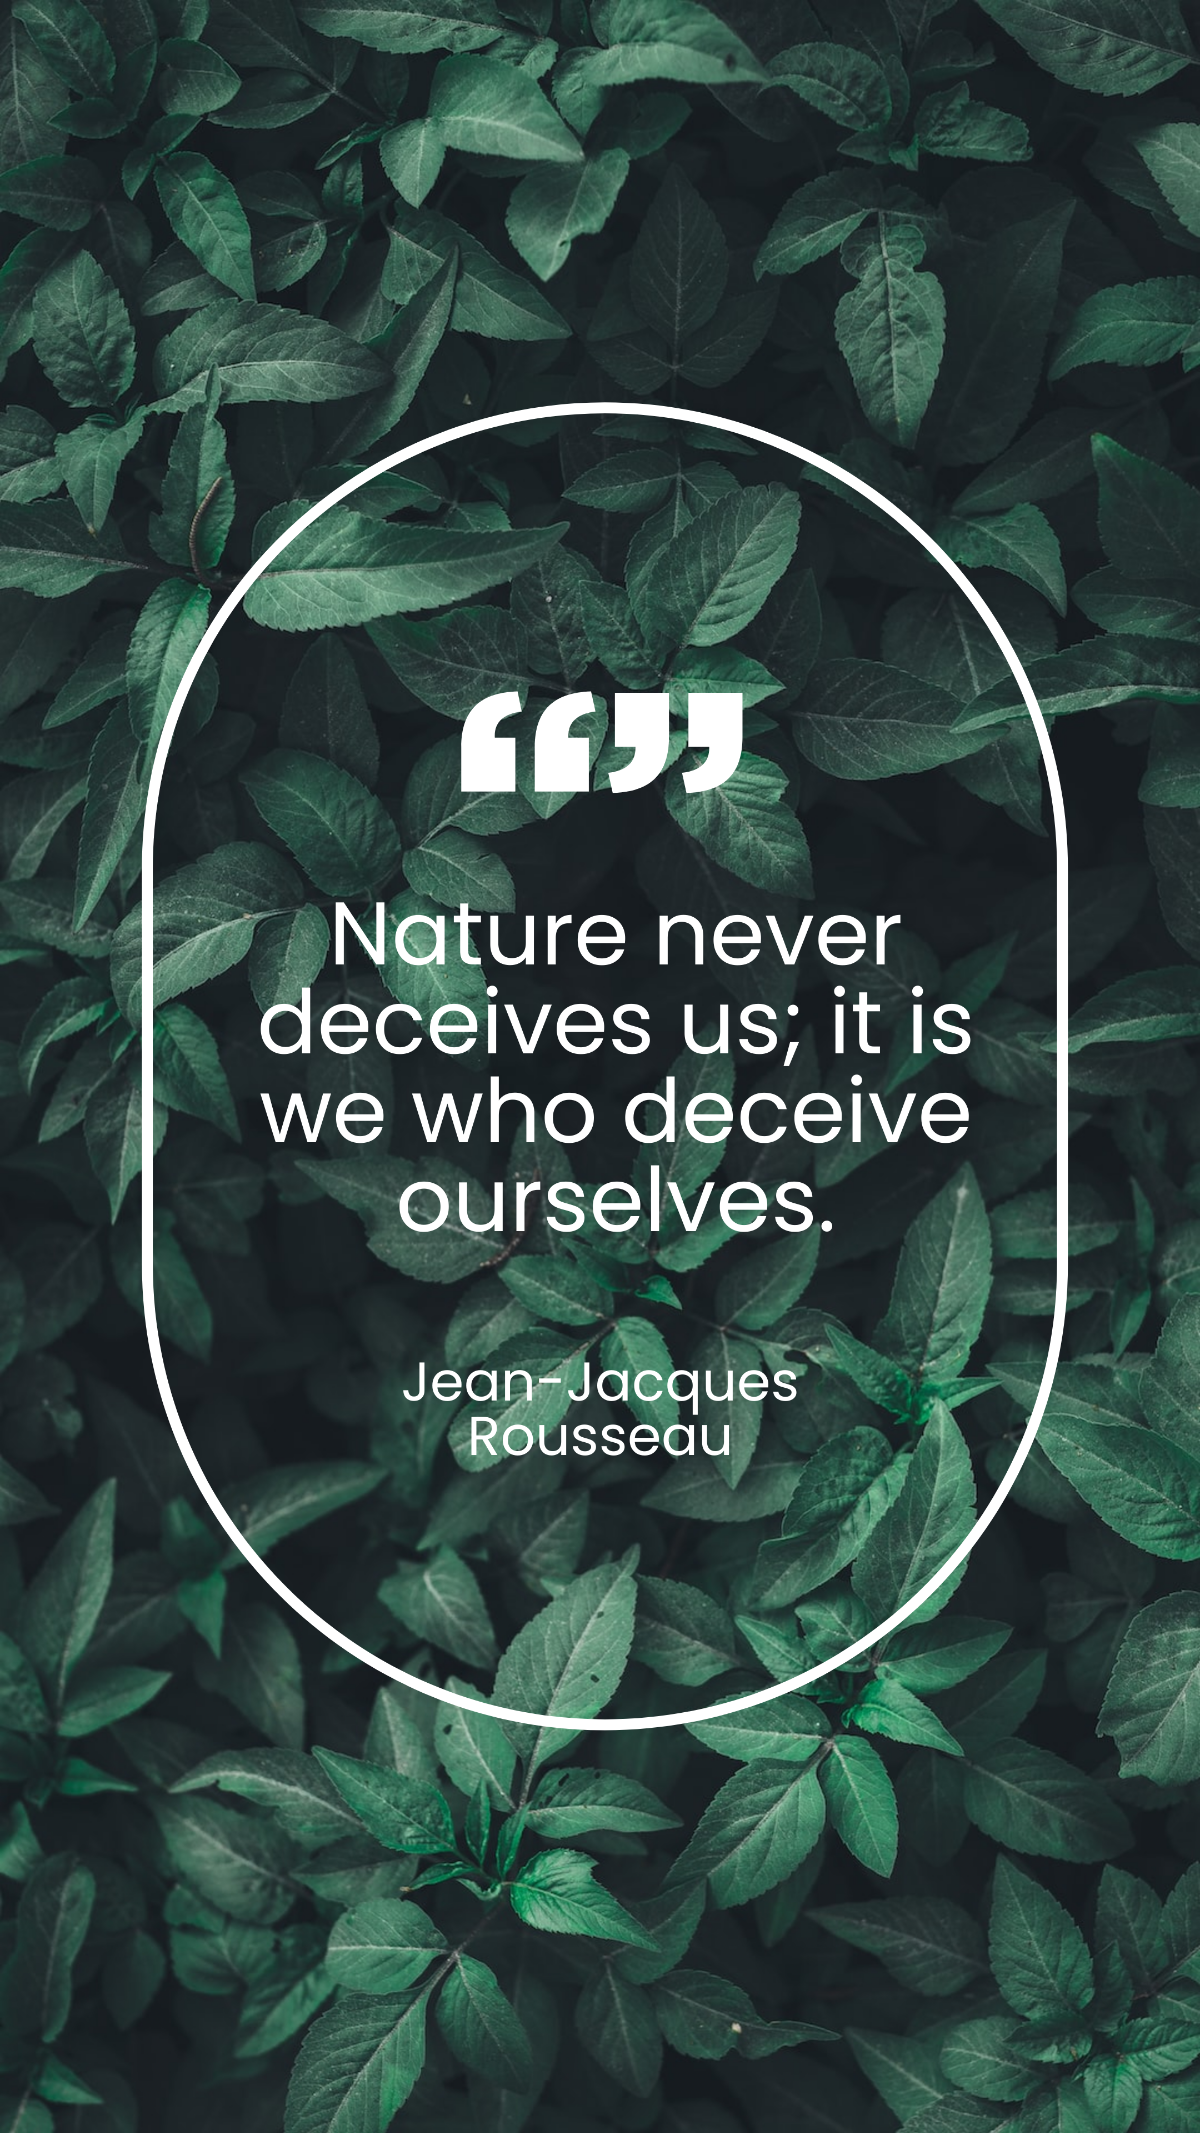 Jean-Jacques Rousseau - Nature never deceives us; it is we who deceive ourselves.